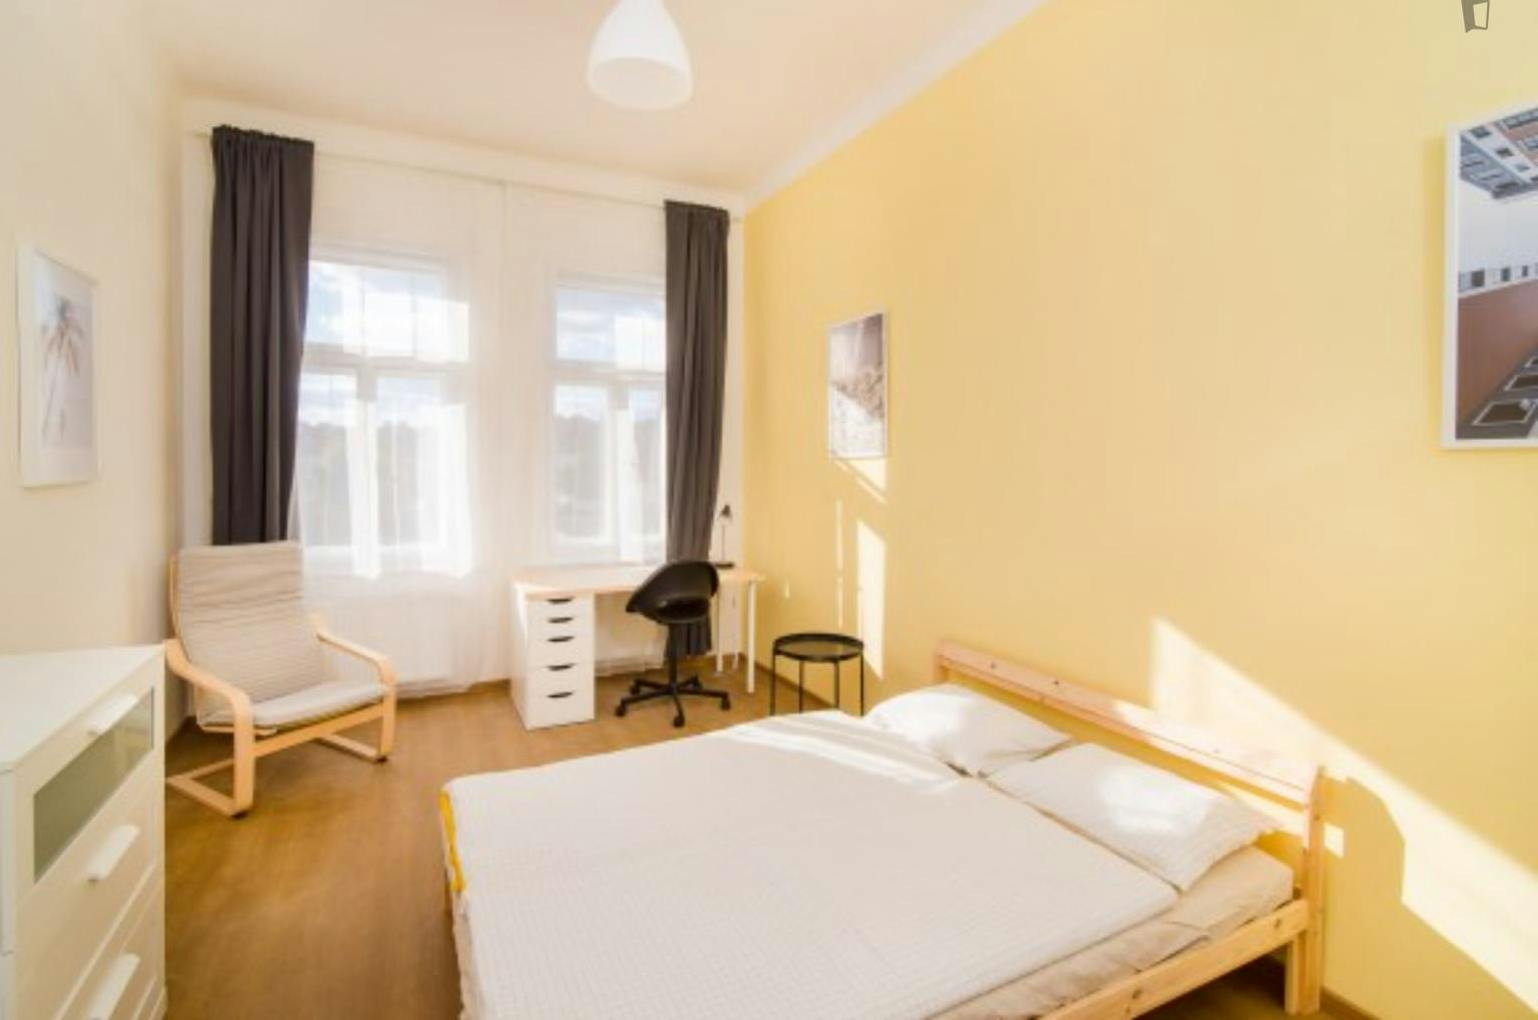 Comfy double bedroom in a 5-bedroom apartment close to Riegrovy sady